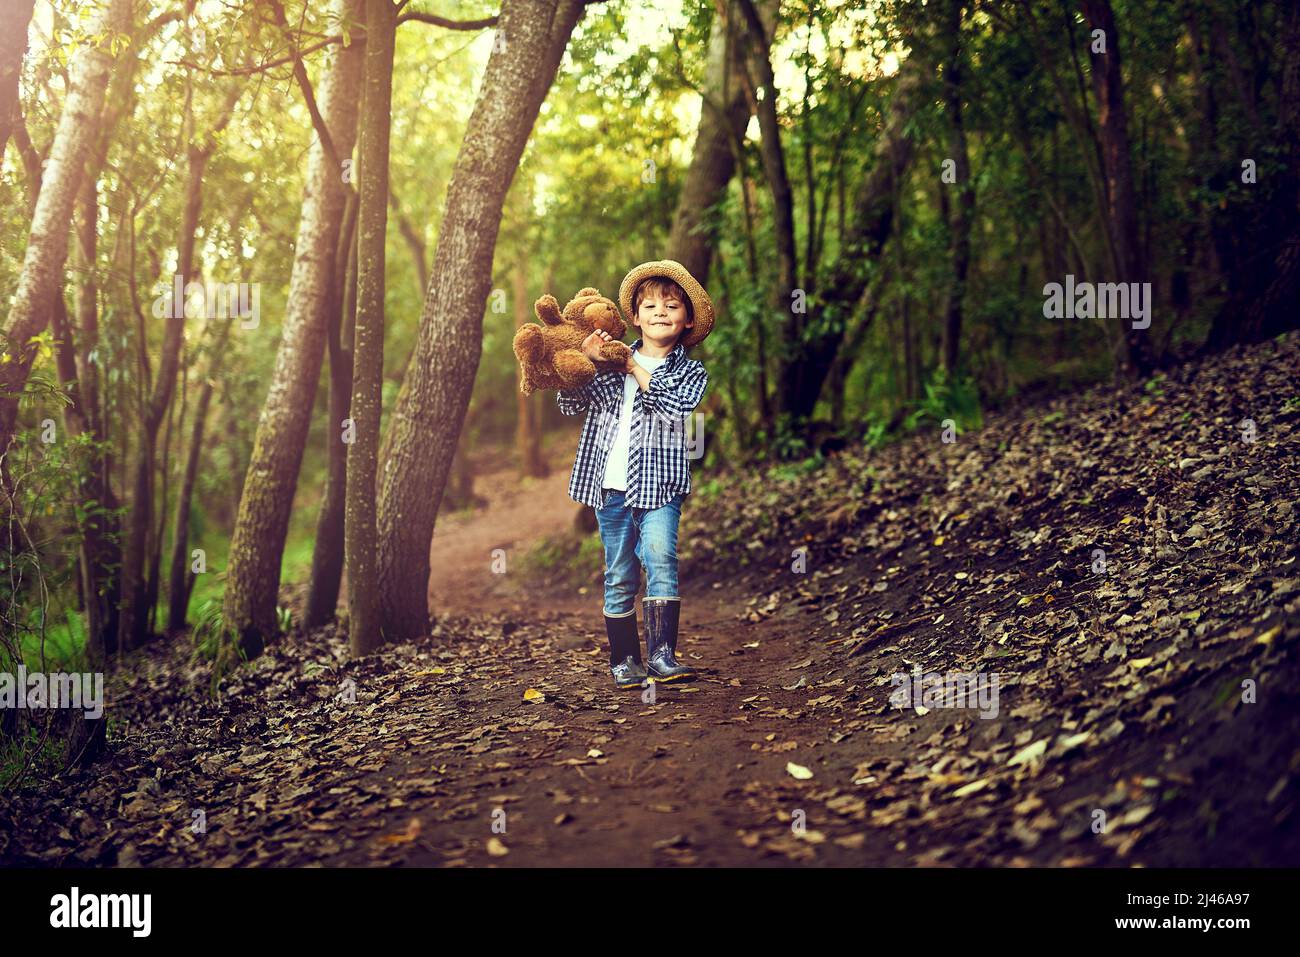 Teddy and I are quite excited about this adventure. Shot of a little boy sitting in the forest with his teddy bear. Stock Photo